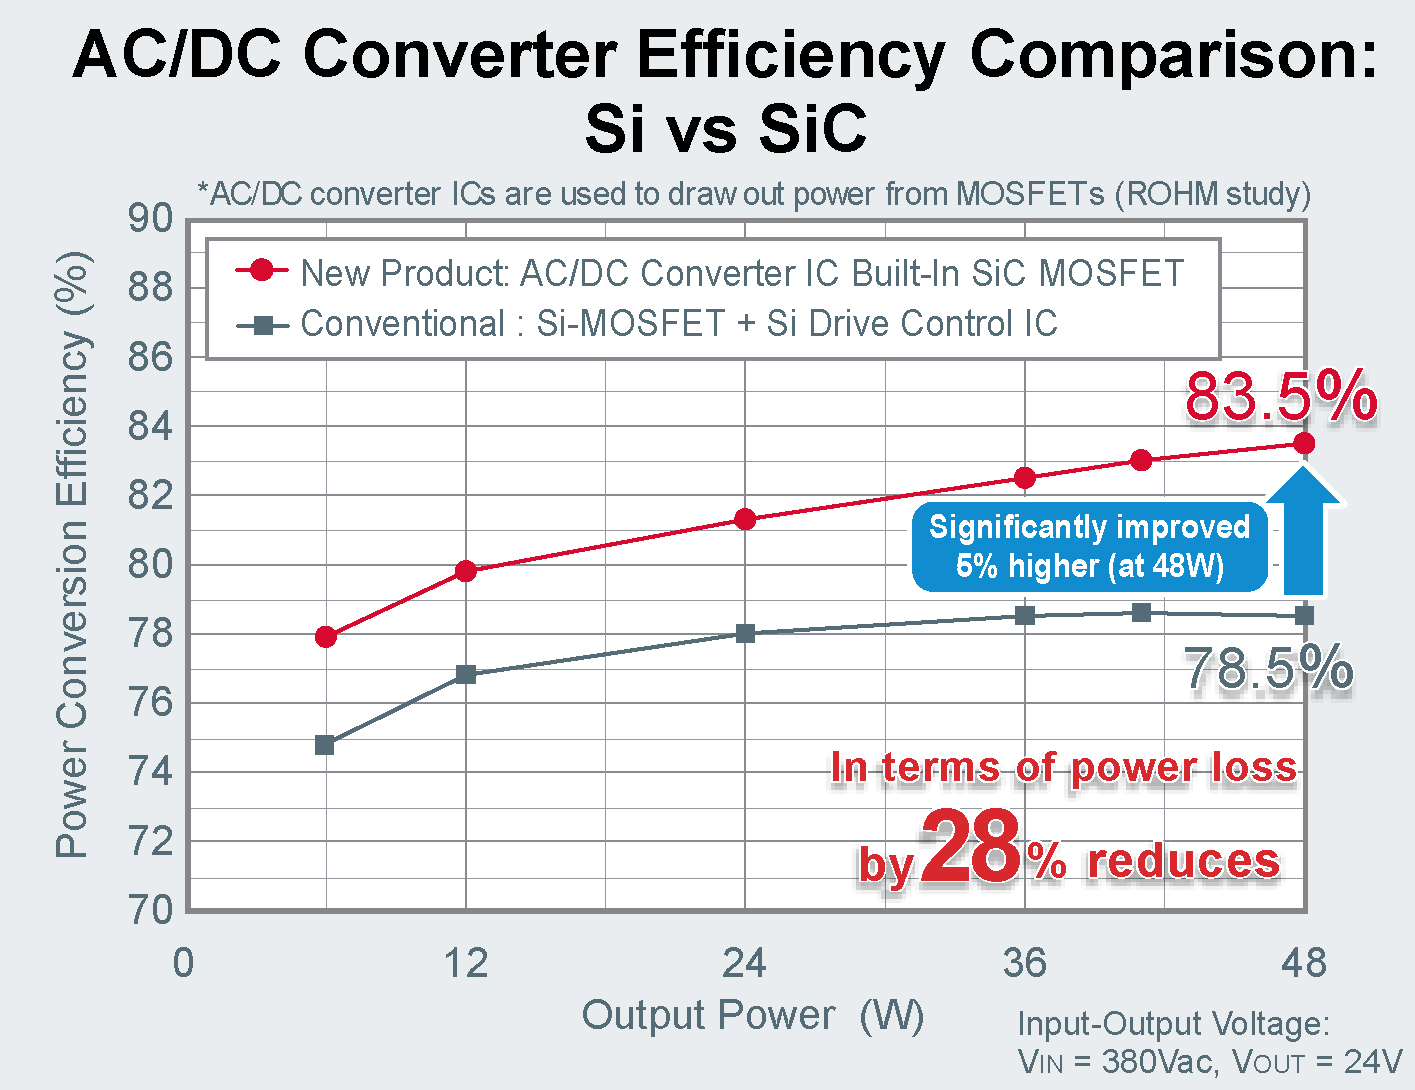 SiC MOSFET performance is optimized to achieve dramatically improved power savings.